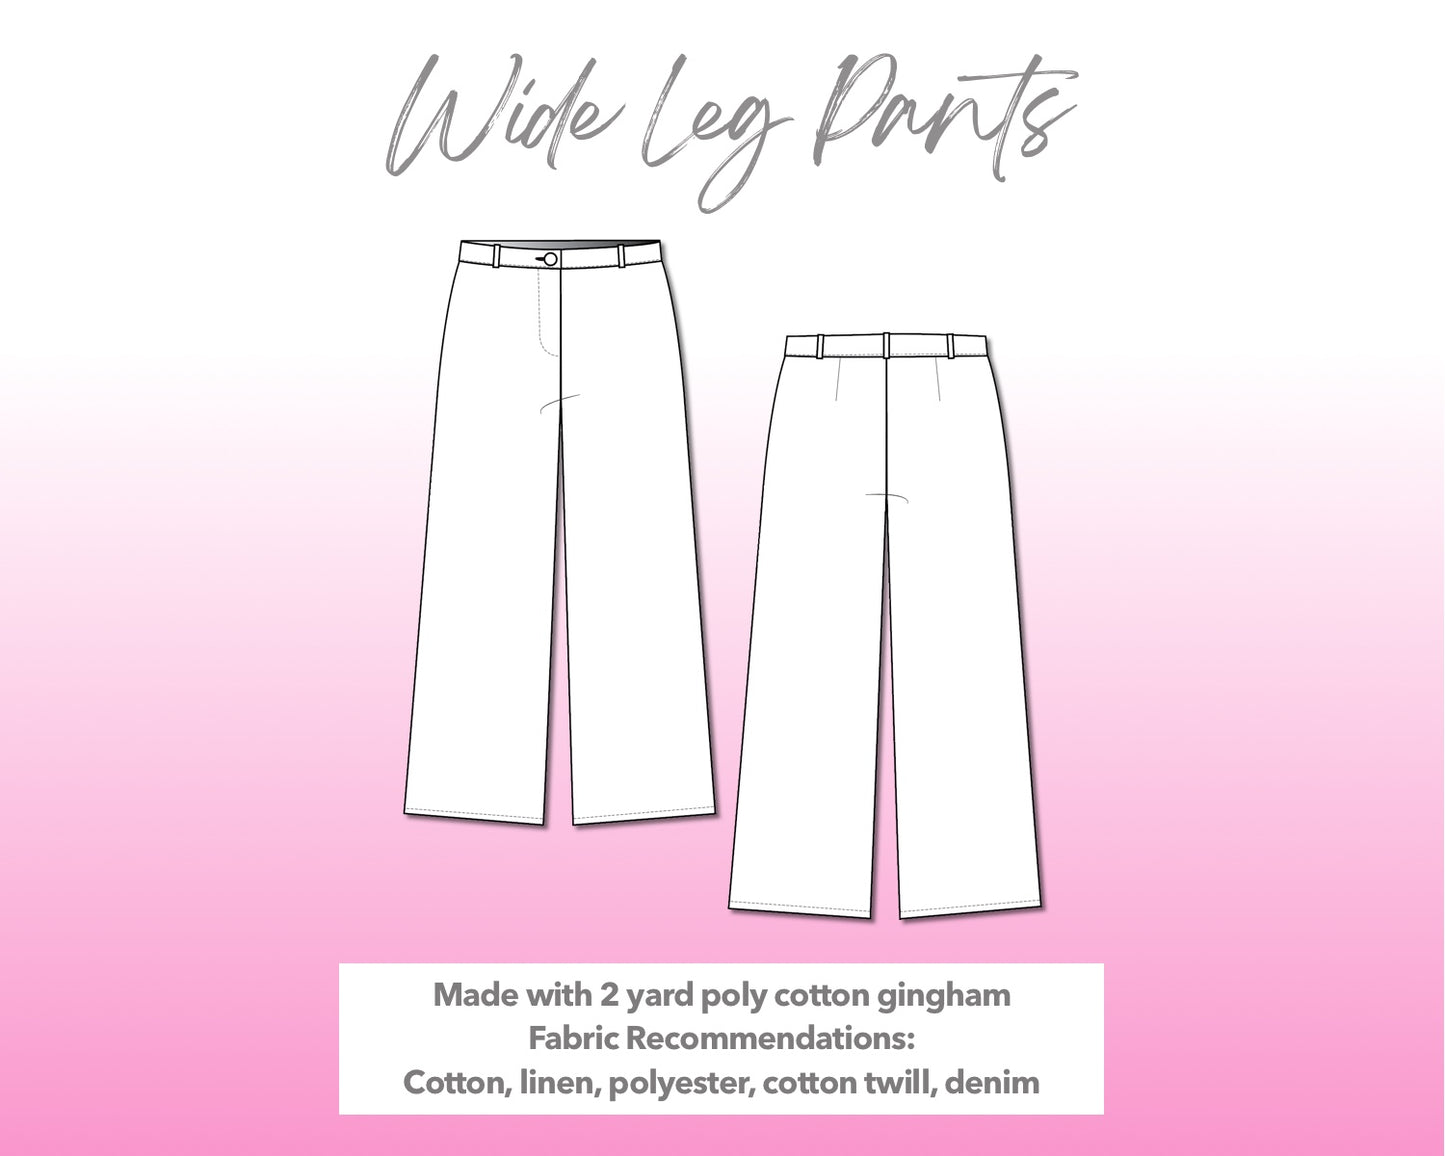 Illustration and detailed description for Wide Leg Pants sewing pattern.